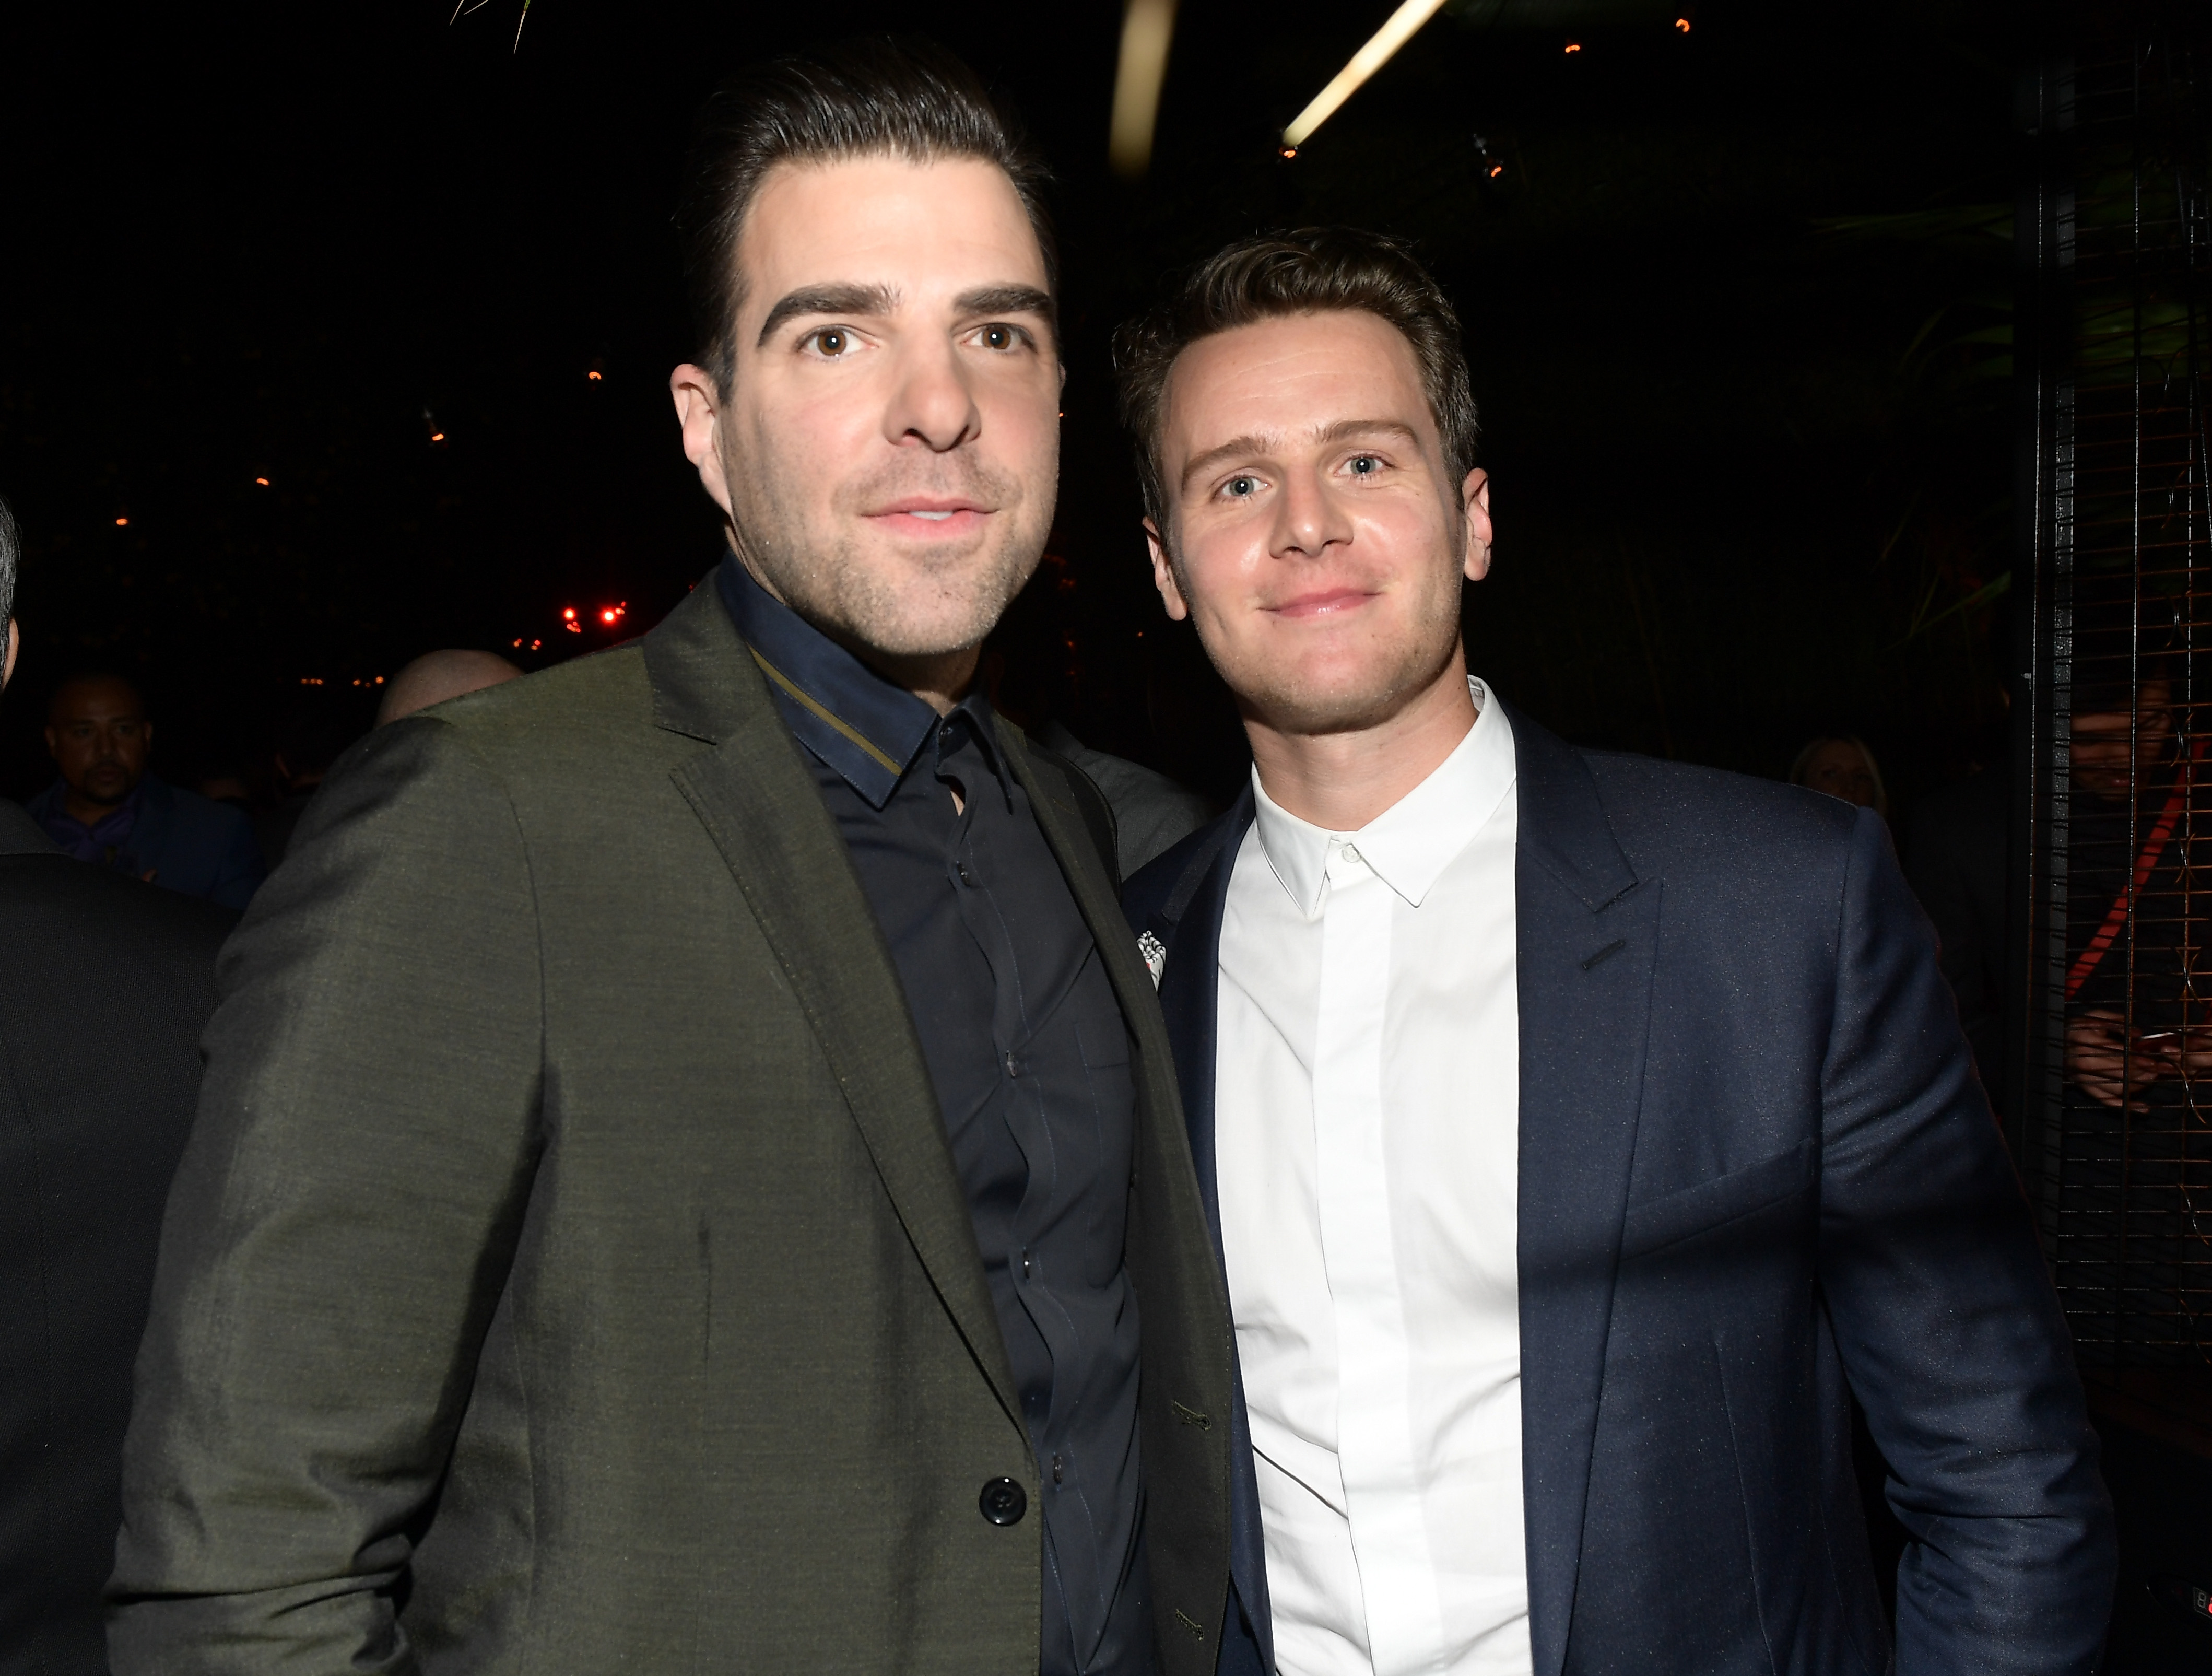 Zachary Quinto (L) and Jonathan Groff attend the 2017 GQ Men of the Year party at Chateau Marmont, on December 7, 2017, in Los Angeles, California. | Source: Getty Images